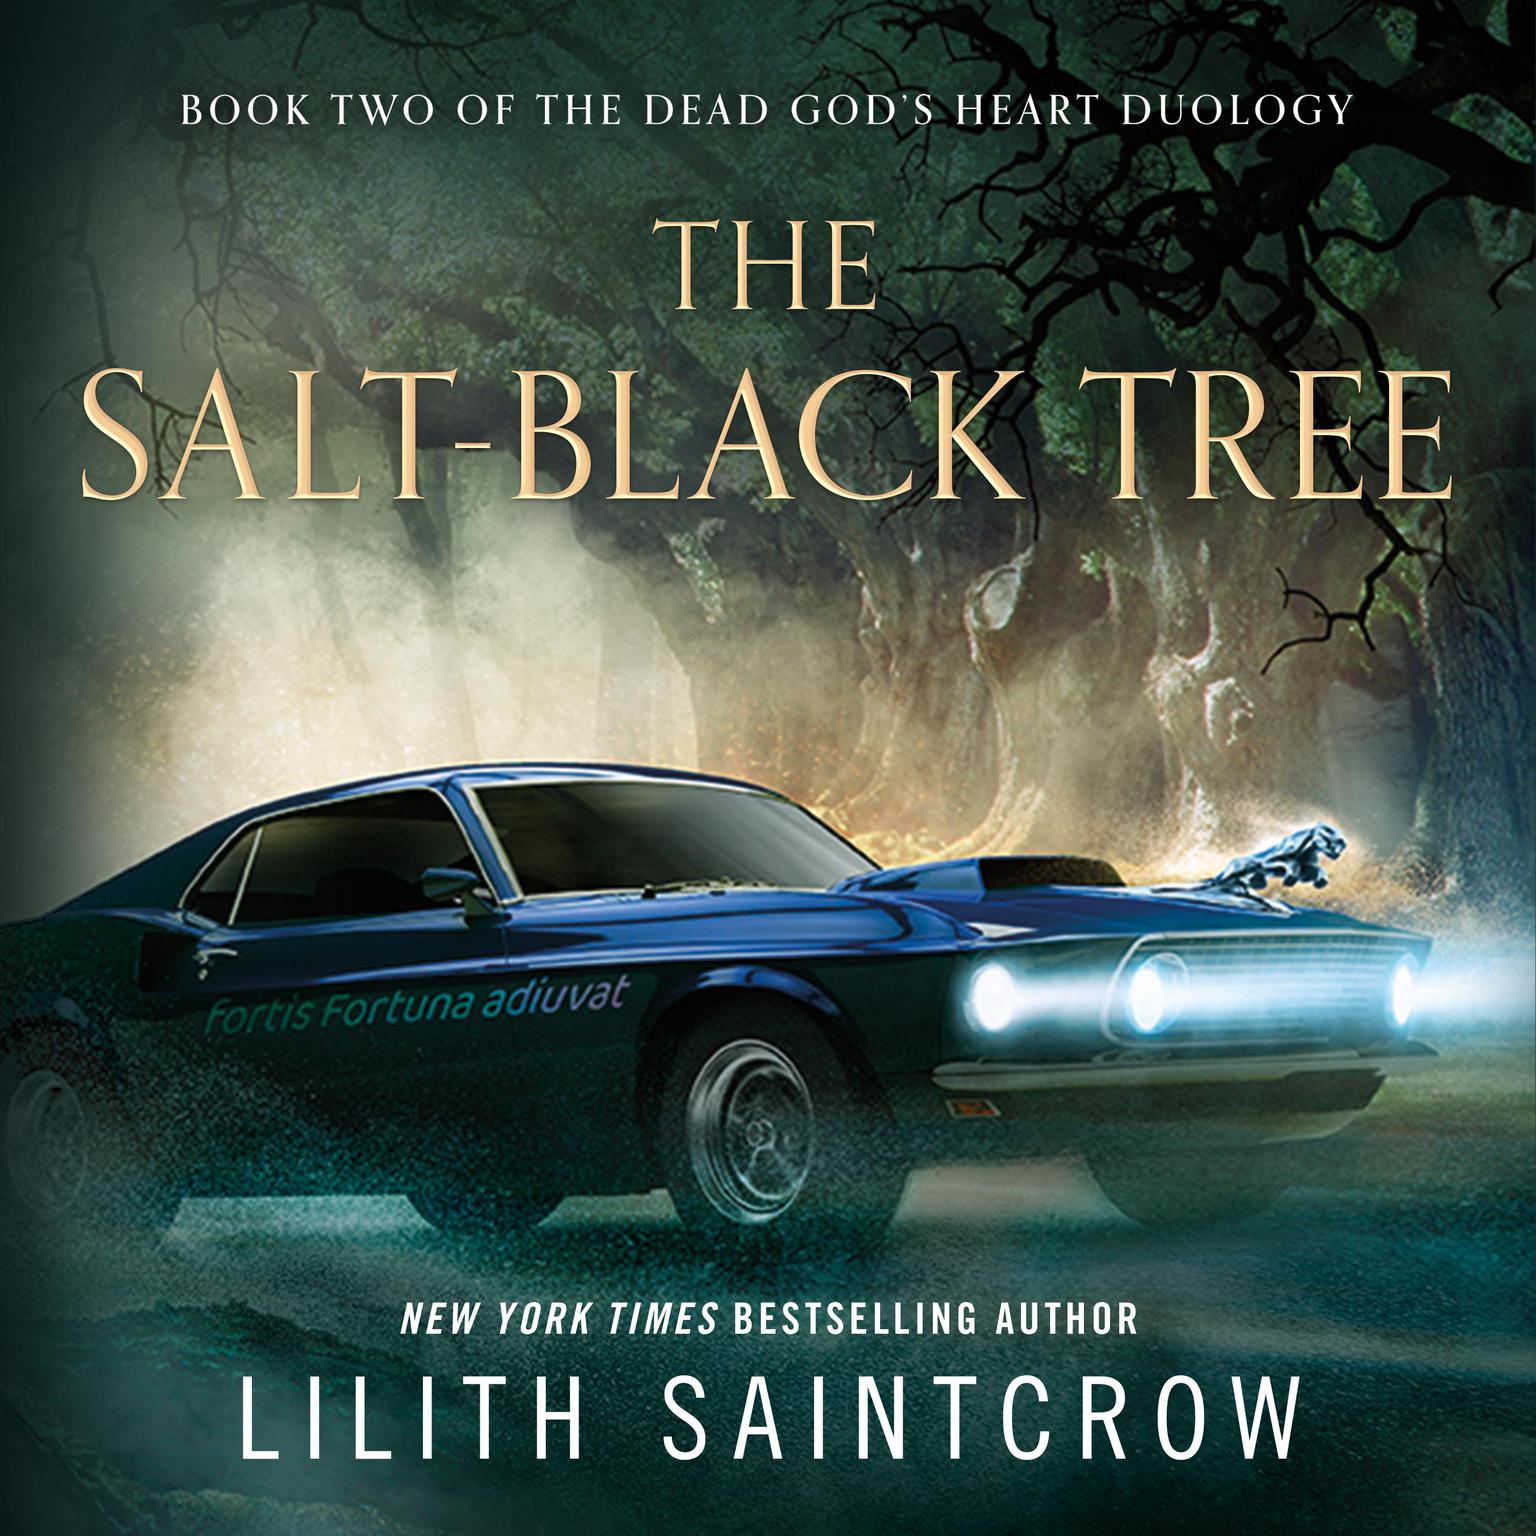 The Salt-Black Tree: Book Two of the Dead Gods Heart Duology Audiobook, by Lilith Saintcrow